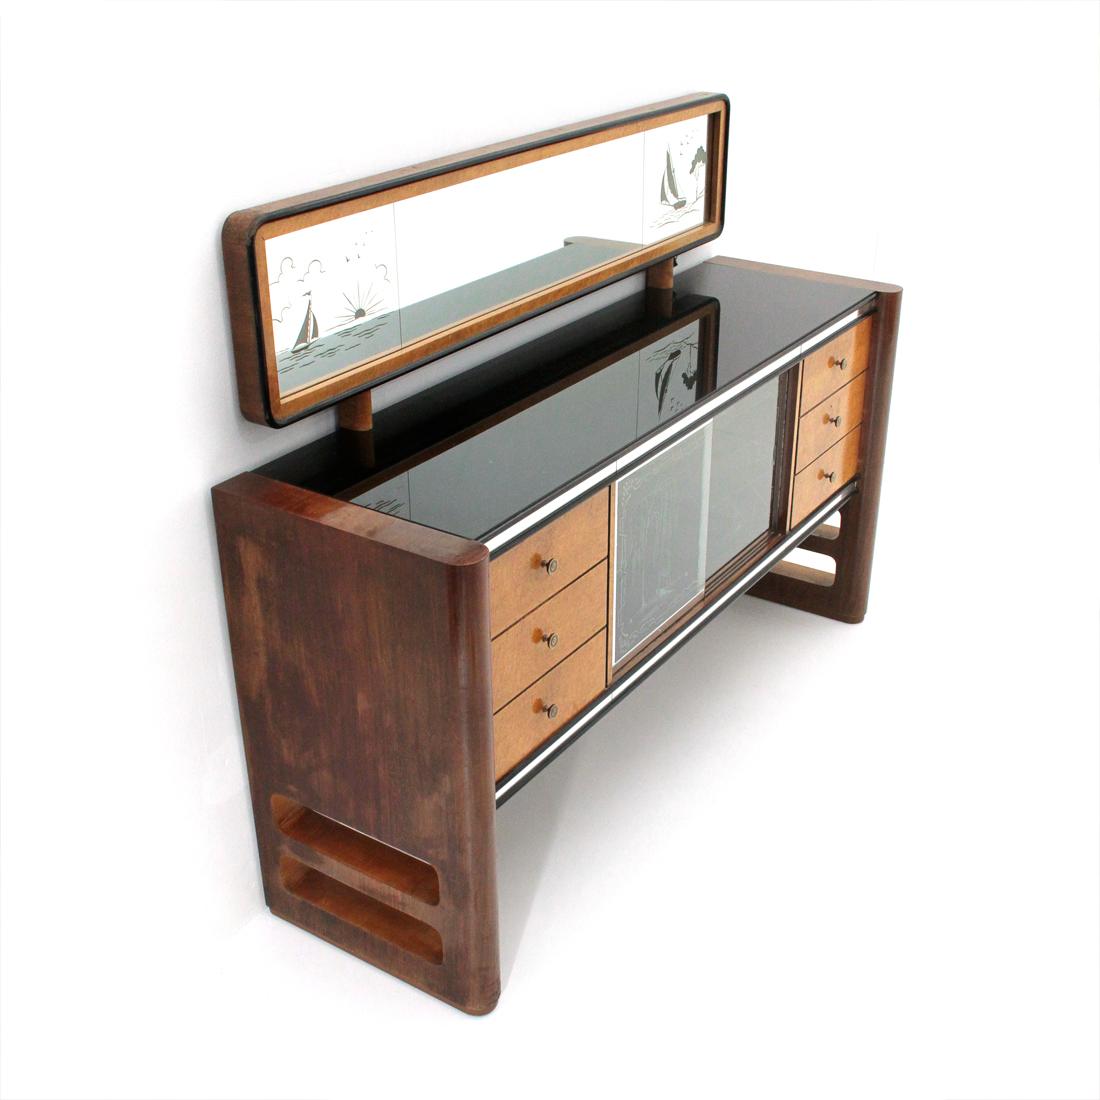 Sideboard produced in the 1950s by the Permanente del Mobile Cantù.
Side panels in veneered wood with a rounded front surface.
Central body in veneered wood.
Over and under front frames in mirror.
Side drawers veneered in briar with brass